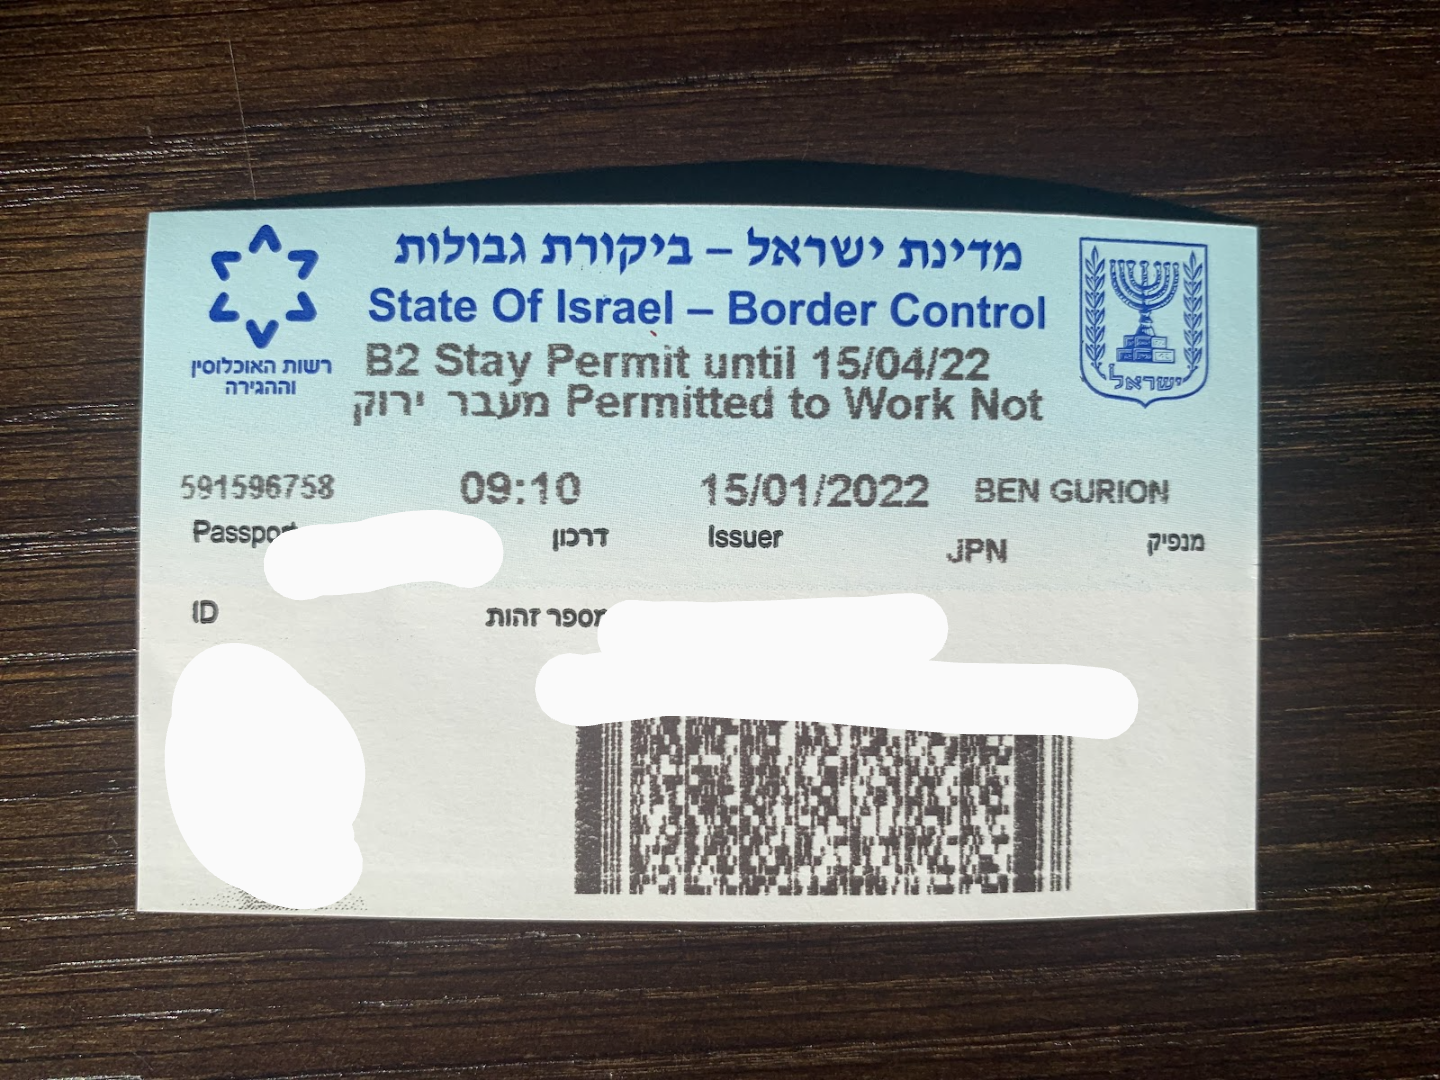 blue card that will be given by border control